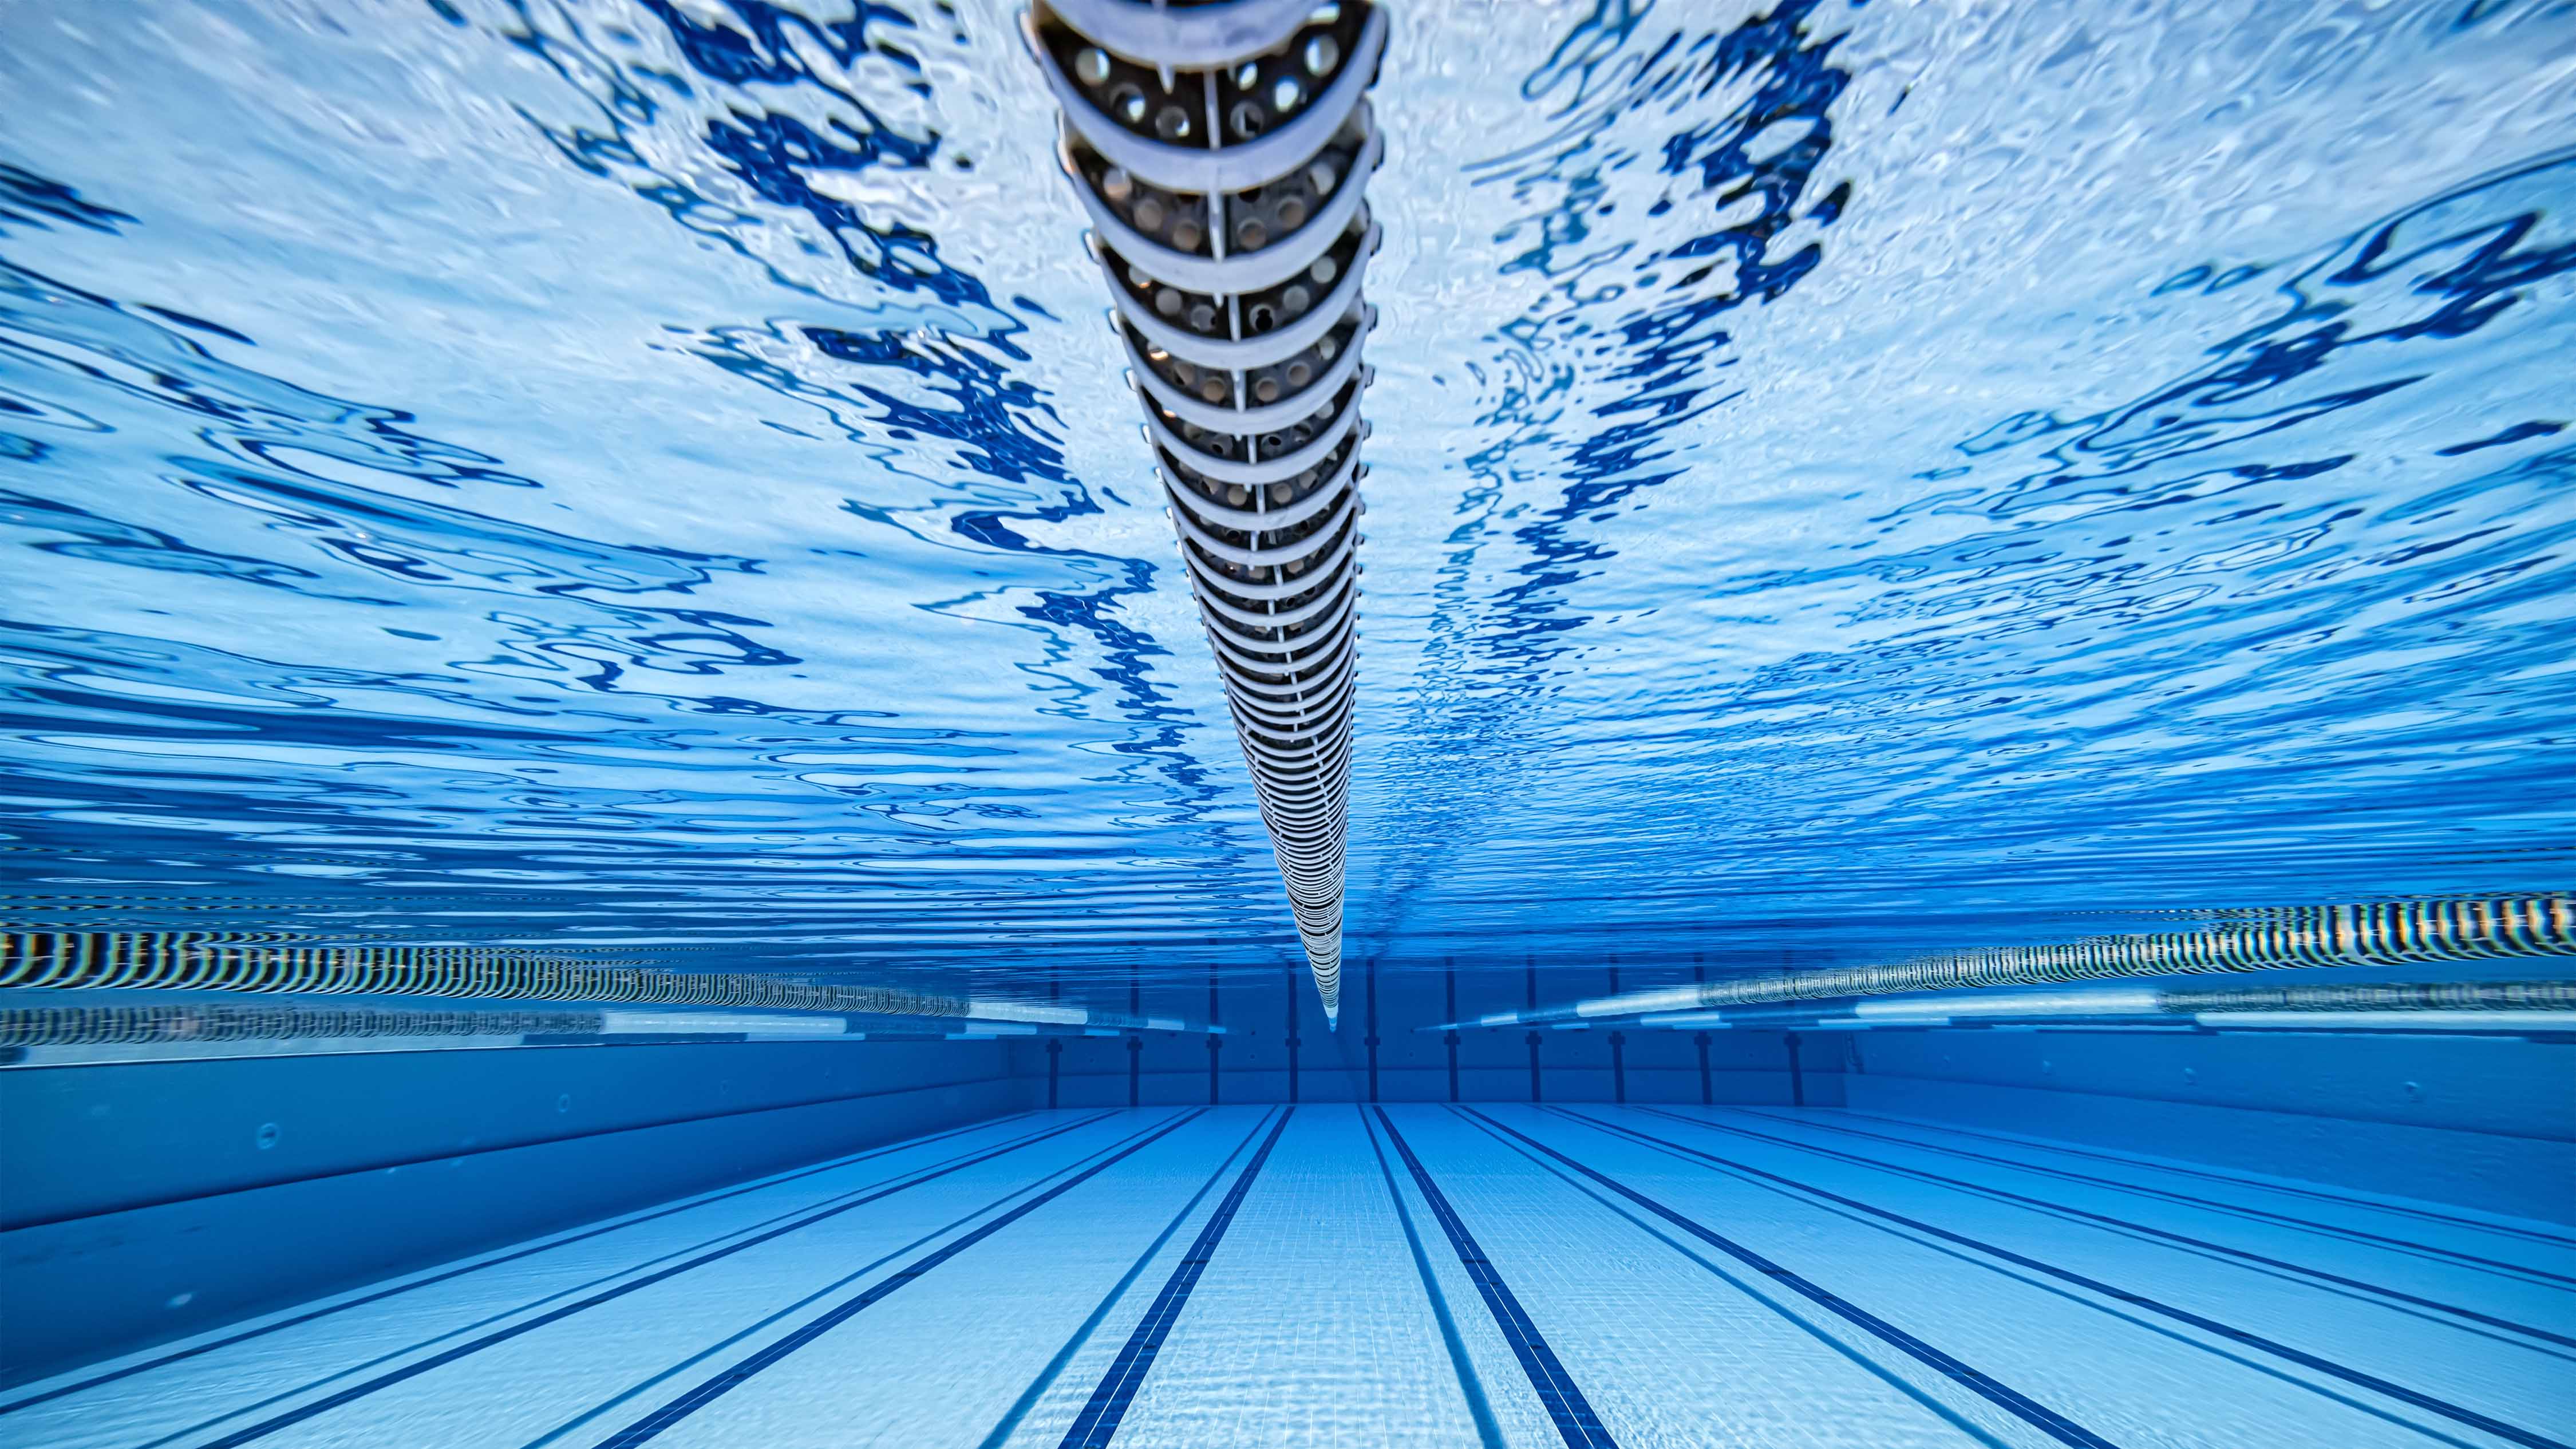 Photo by Andrey Armyagov via Shutterstock. Chesapeake received $9 million from the state to begin the process of planning and building its first public pool.